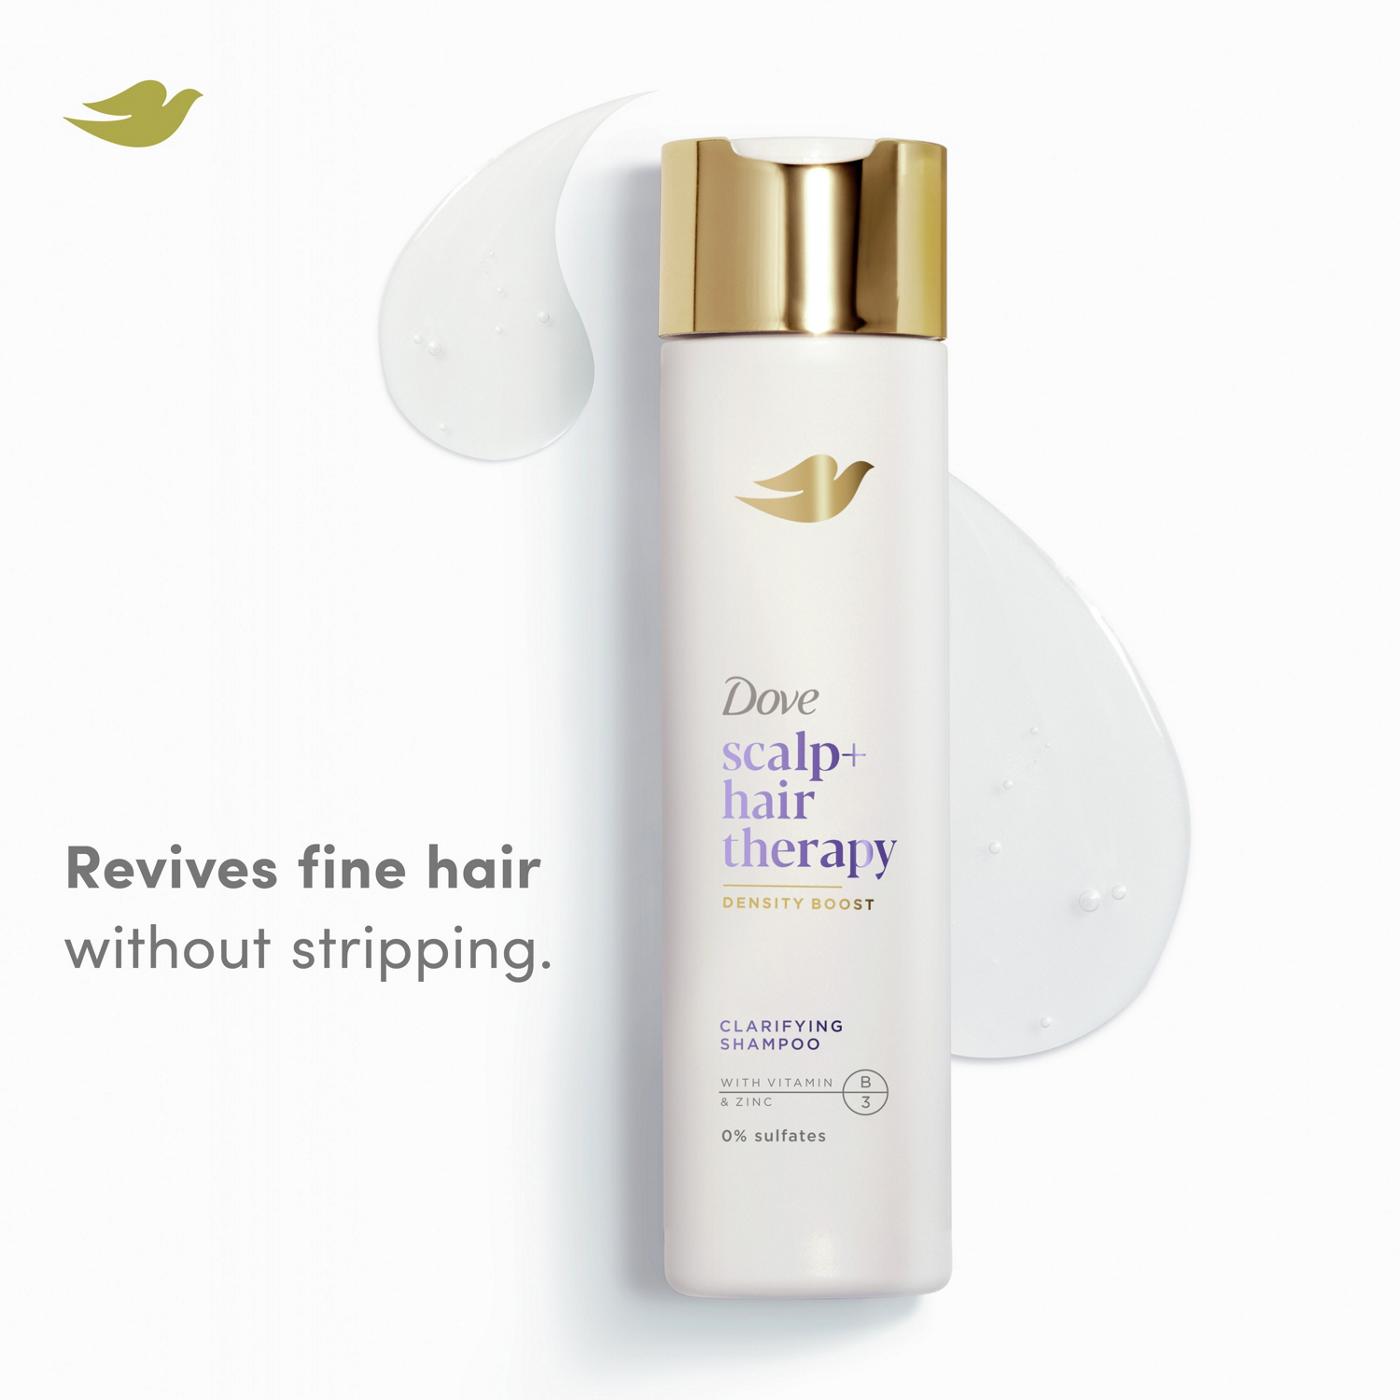 Dove Scalp+ Hair Therapy Clarifying Shampoo; image 4 of 4